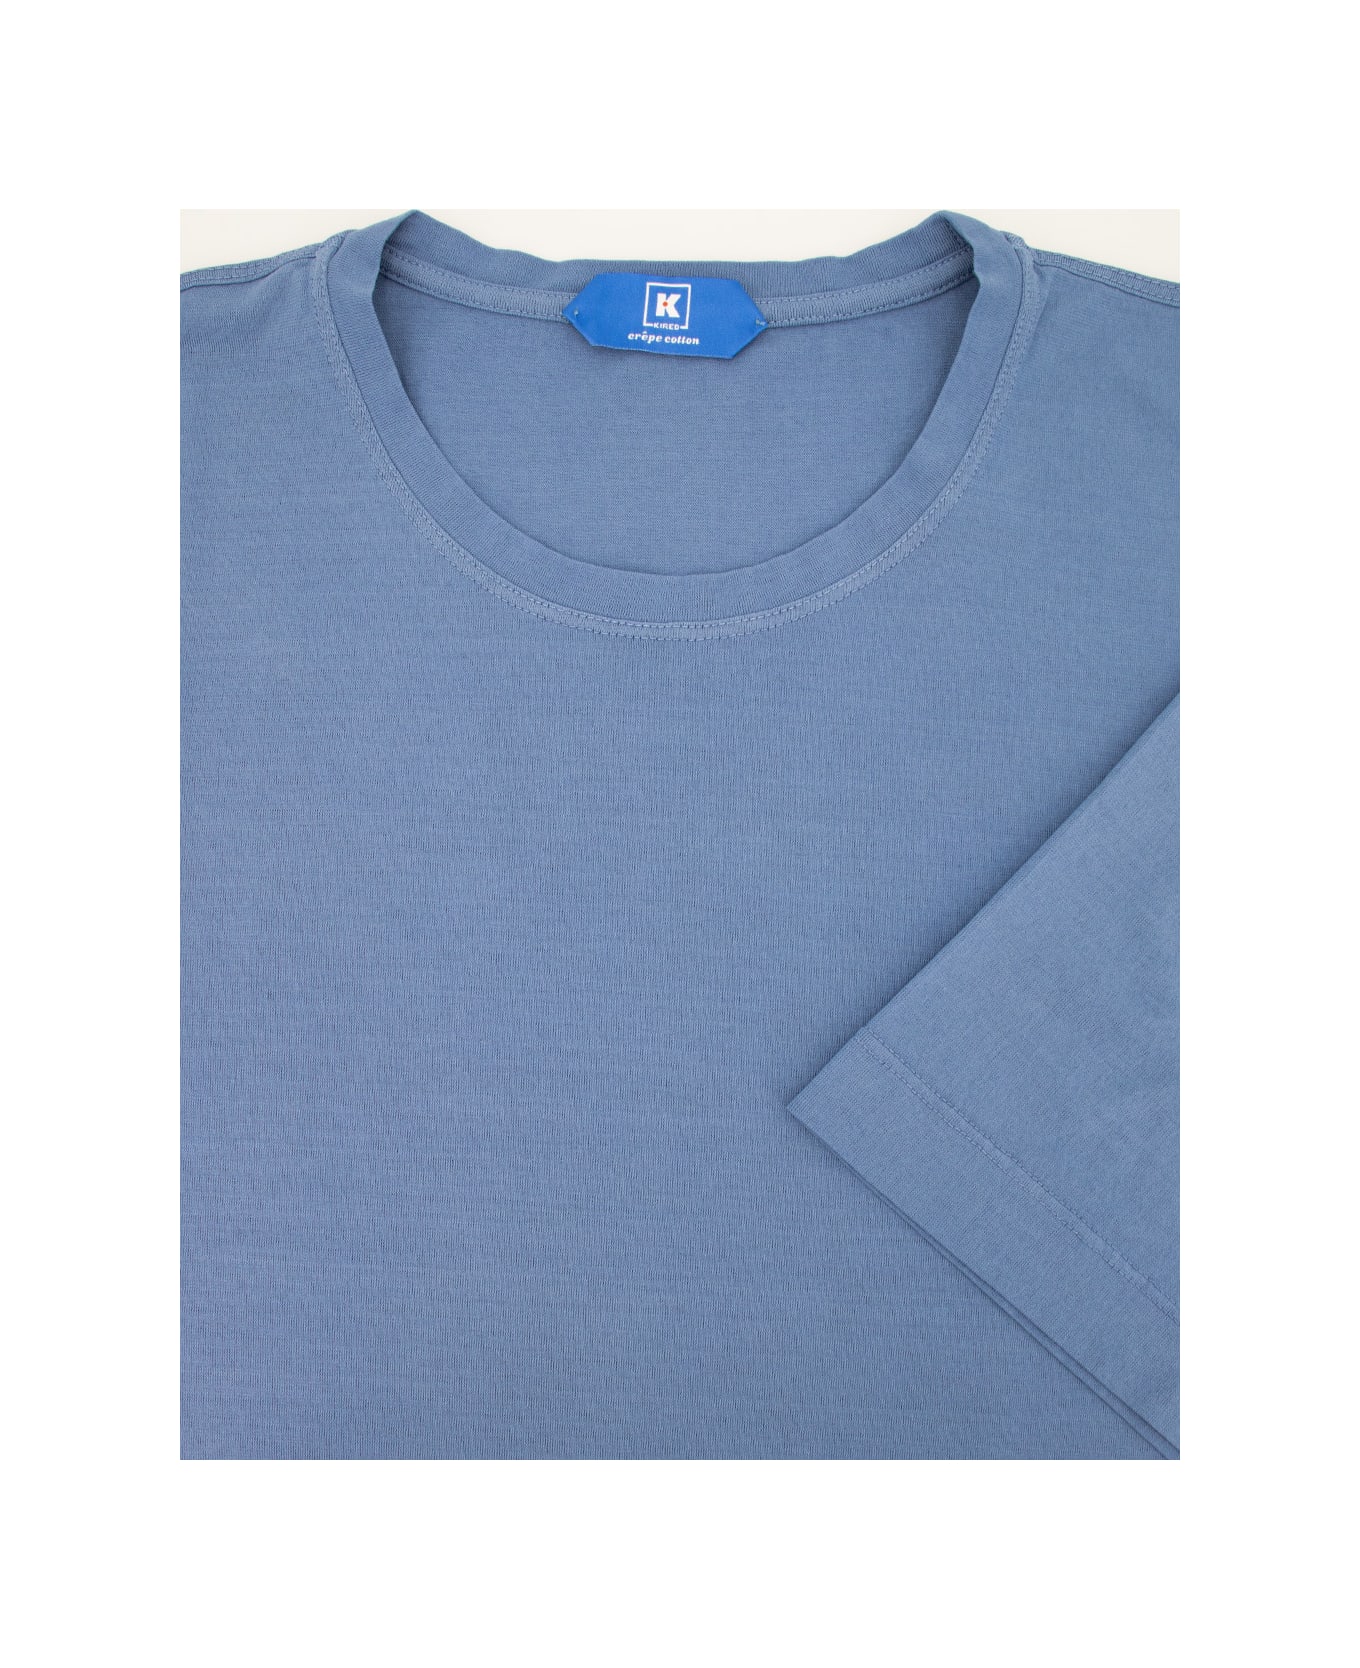 Kired T-shirt - OLTREMARE シャツ